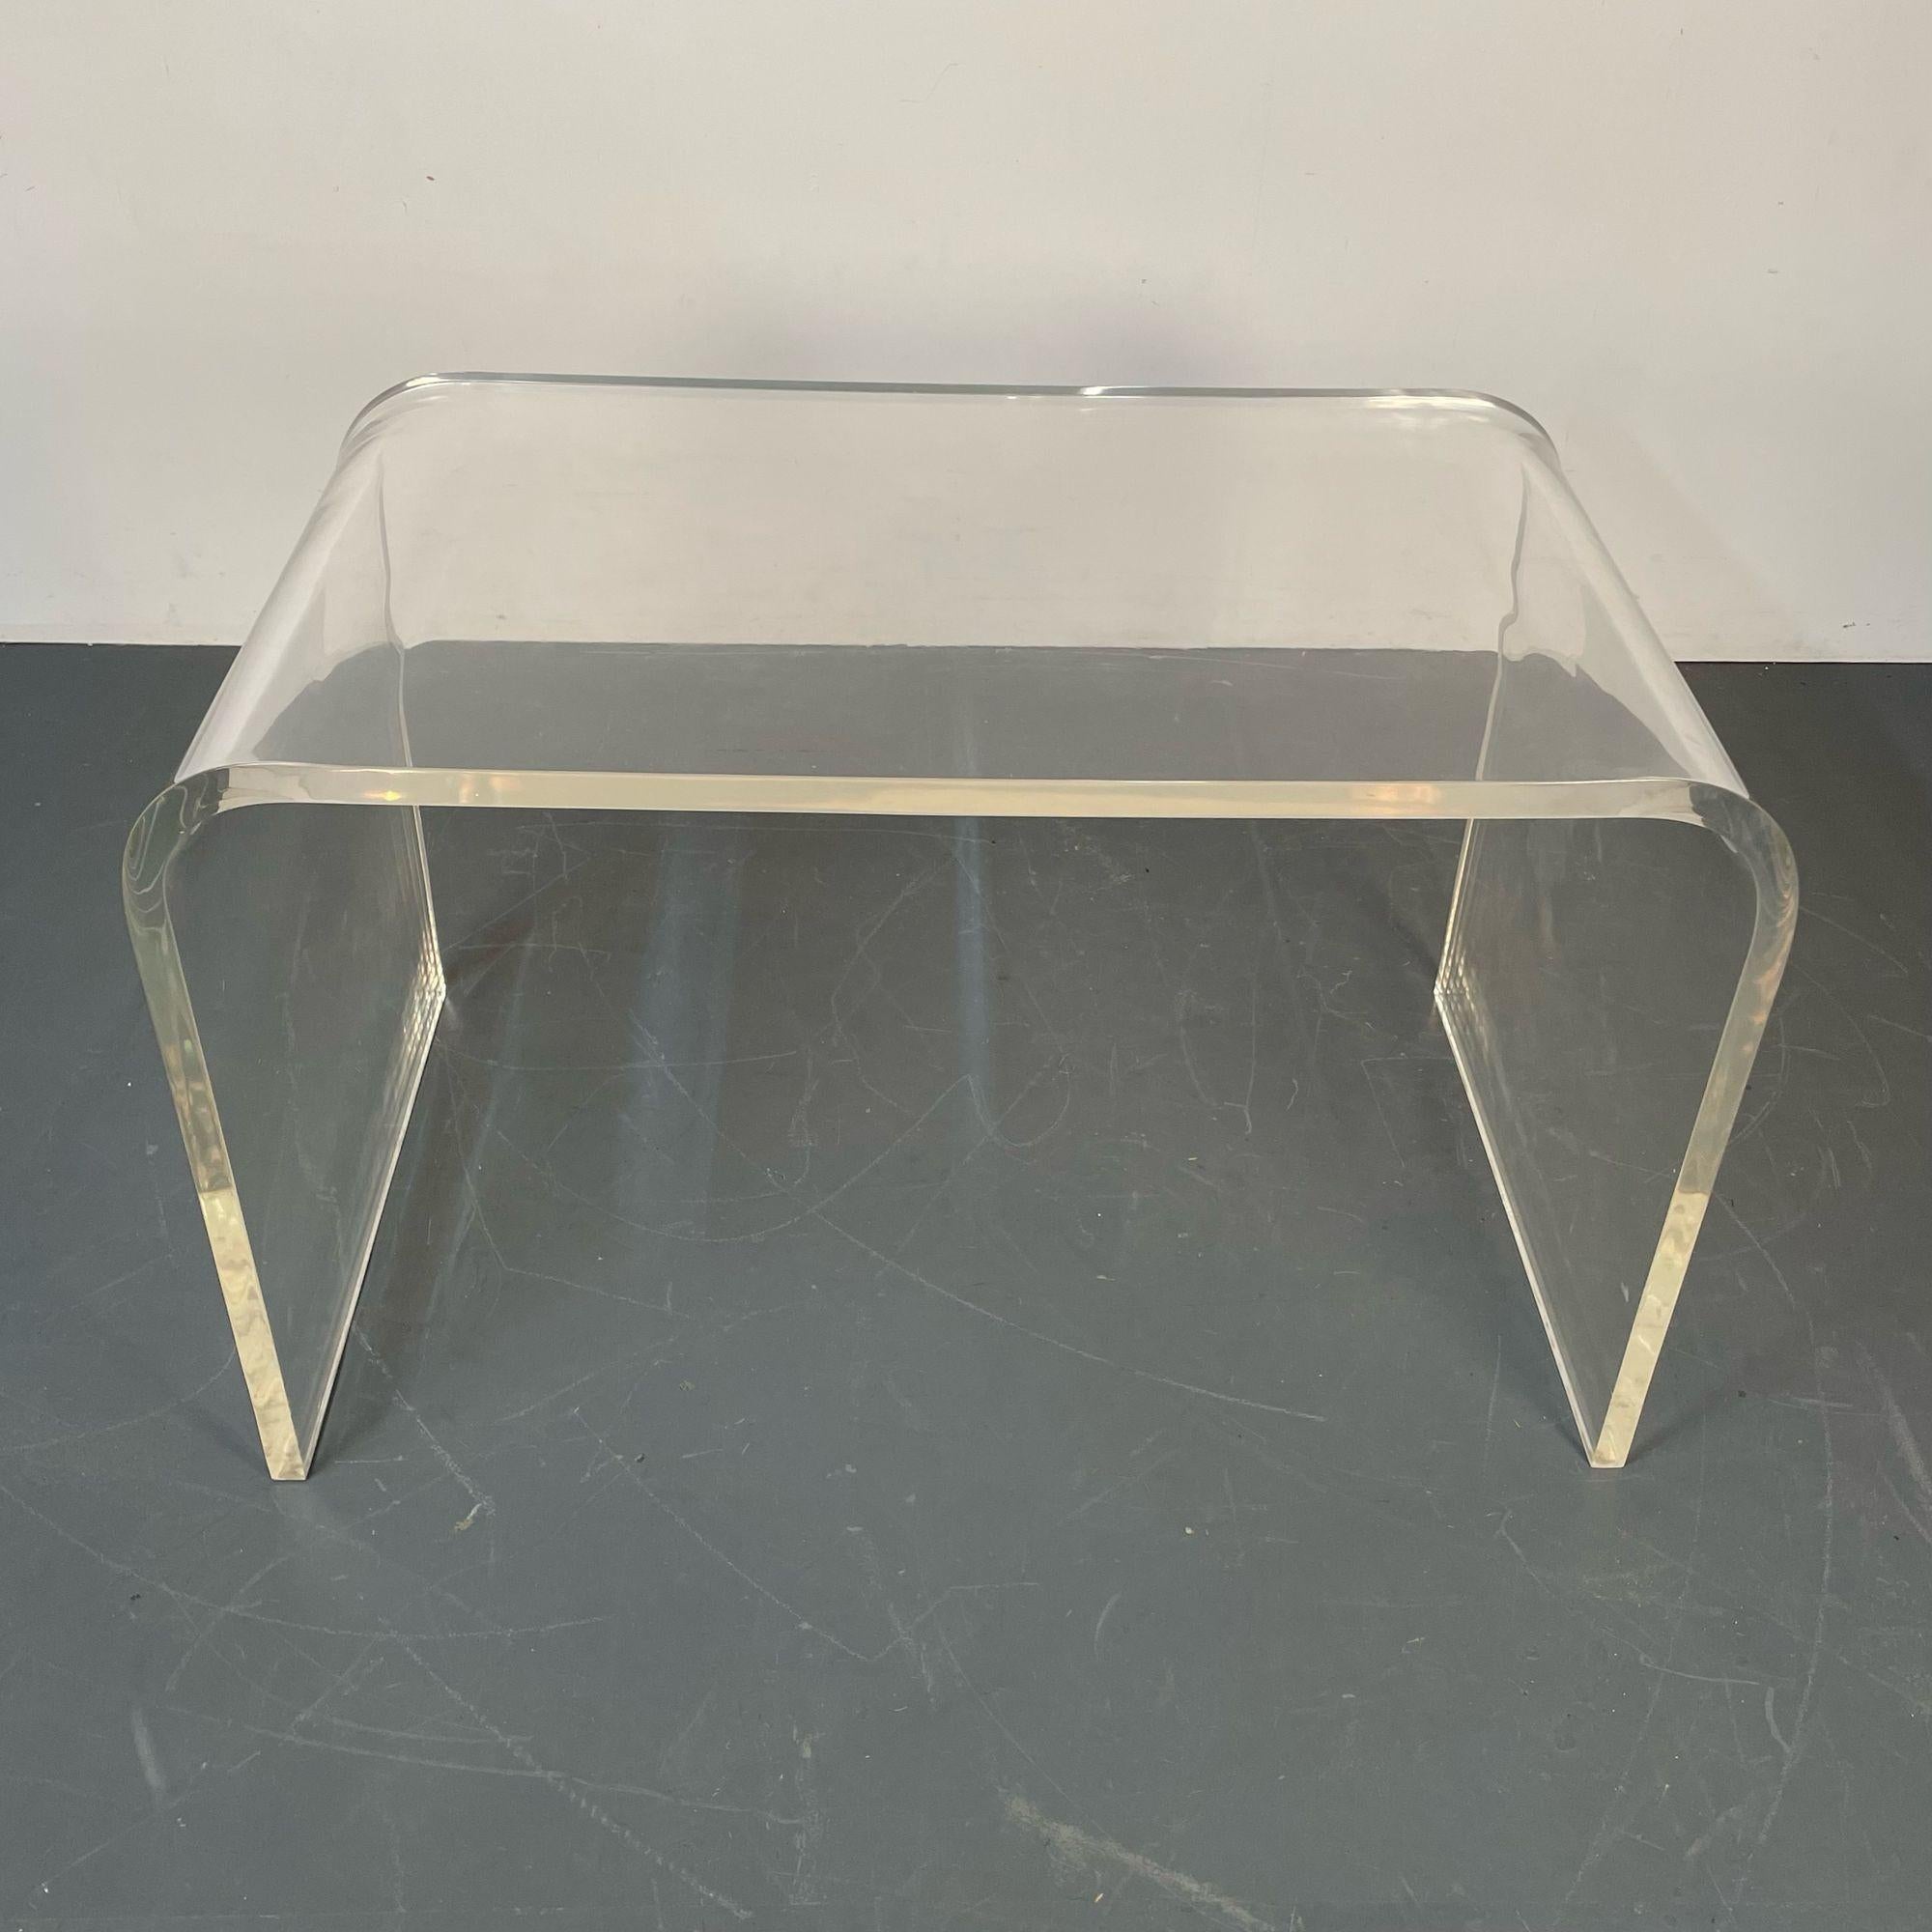 Mid-Century Modern Lucite Waterfall Console / Writing Table or Desk
 
A nice U shaped Lucite writing table or console that can sit center in any room
 
48